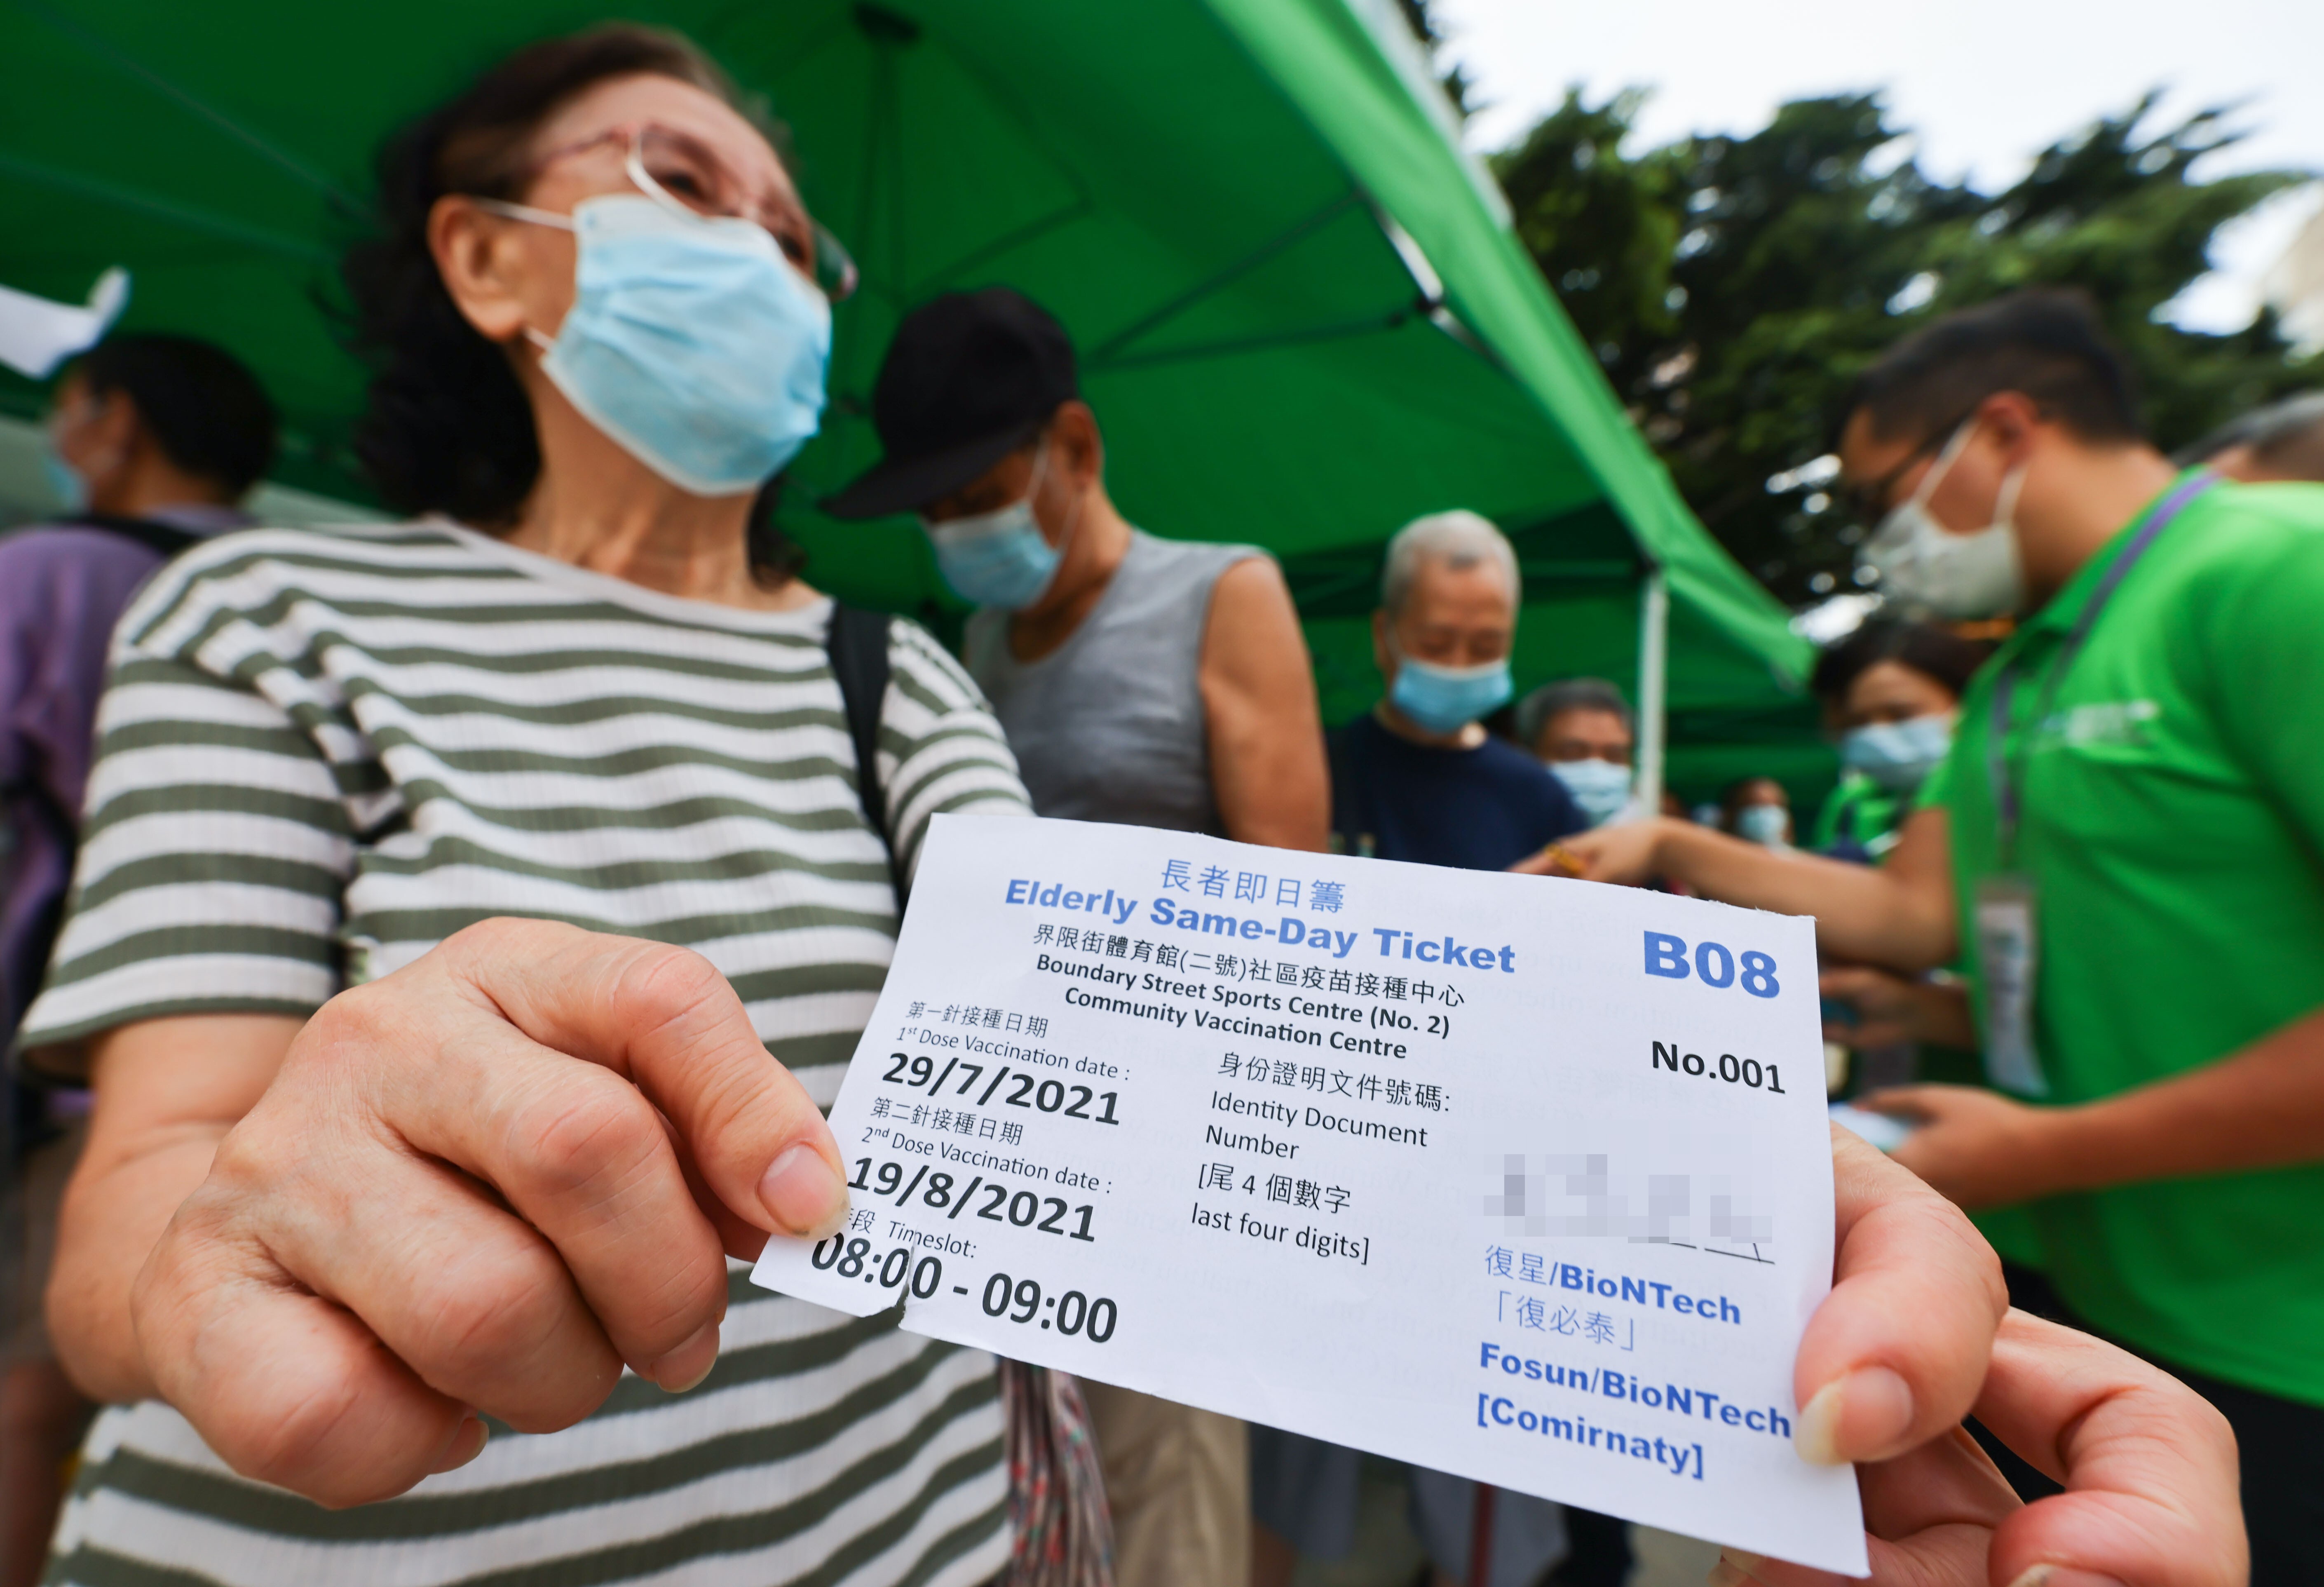 Those aged 70 or above in Hong Kong can get vaccinated from Thursday without making an appointment. Photo: Dickson Lee